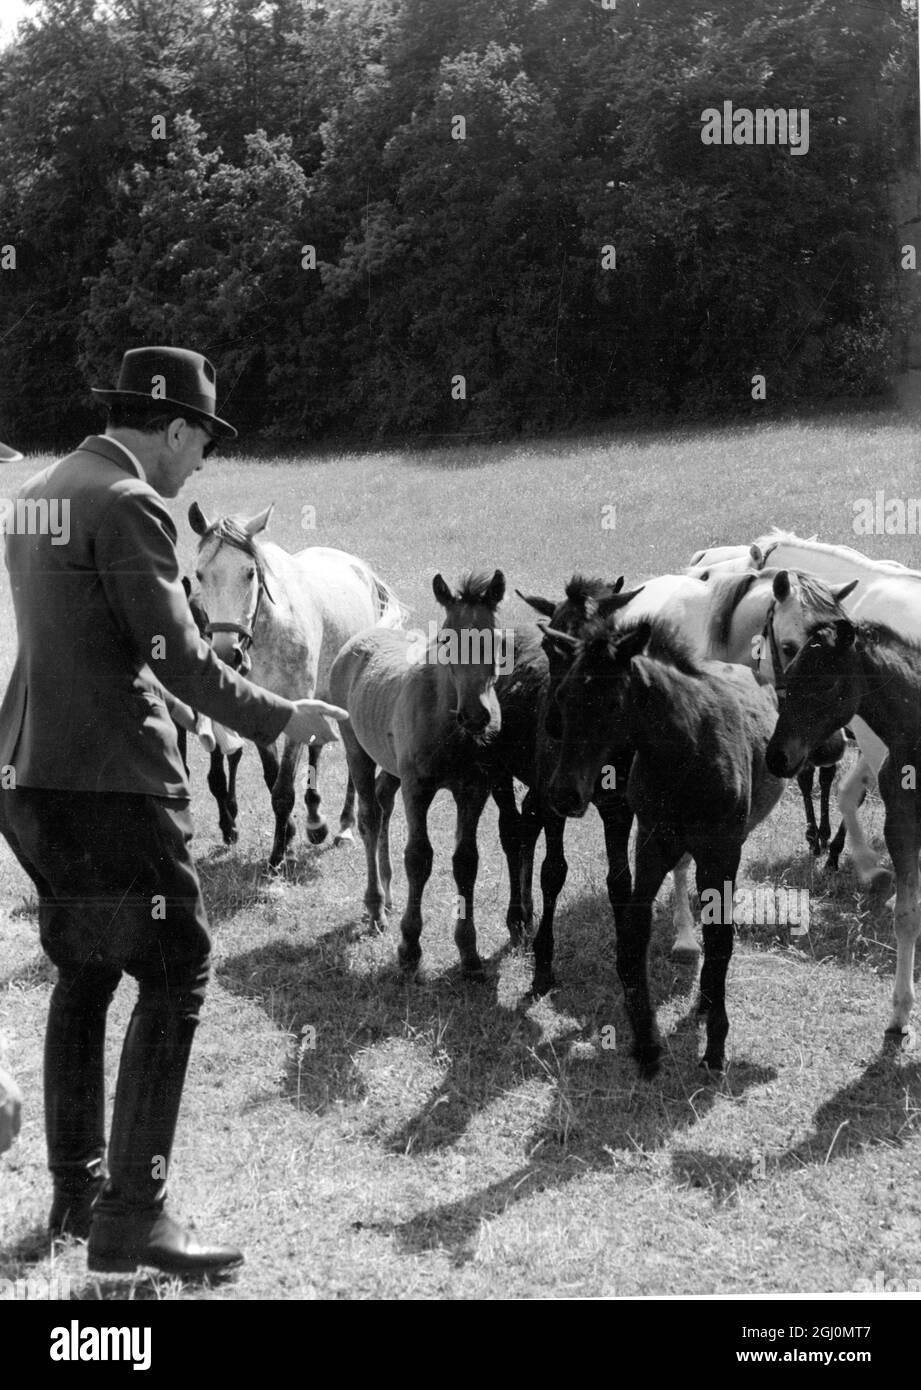 Scenes at the Spanish Riding Academy of Vienna where the famous white stallions of Vienna are schooled under the direction of Col. Podhajsky Stud farm at Wimsbach . The Lippizan is born dark , becomes white usually between the ages of 4 to 9 1-2. Pictures shows Colonel Podhajsky with some of the young foals . September 1950 Stock Photo